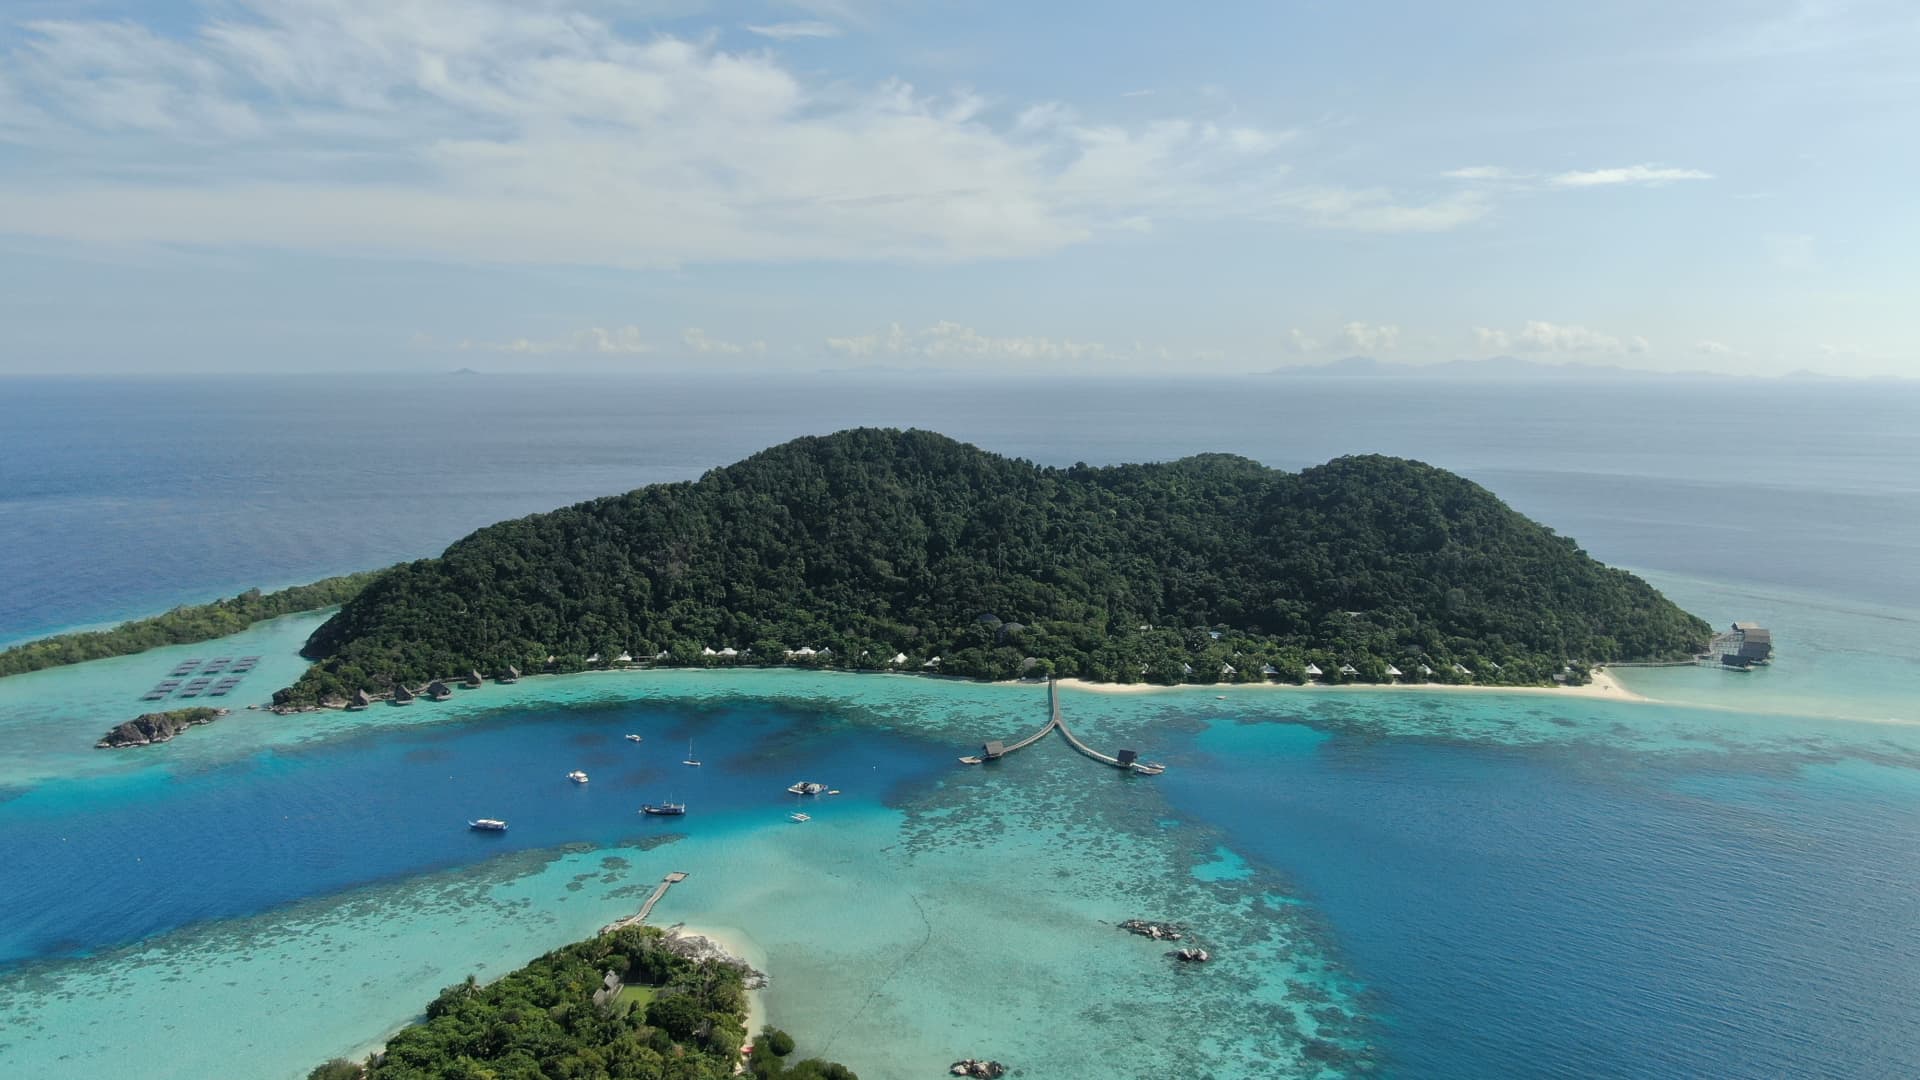 Bawah Reserve, a resort in Indonesia's Anambas Islands, is applying for B Corp certification. The resort uses solar power and desalinates drinking water on the island.